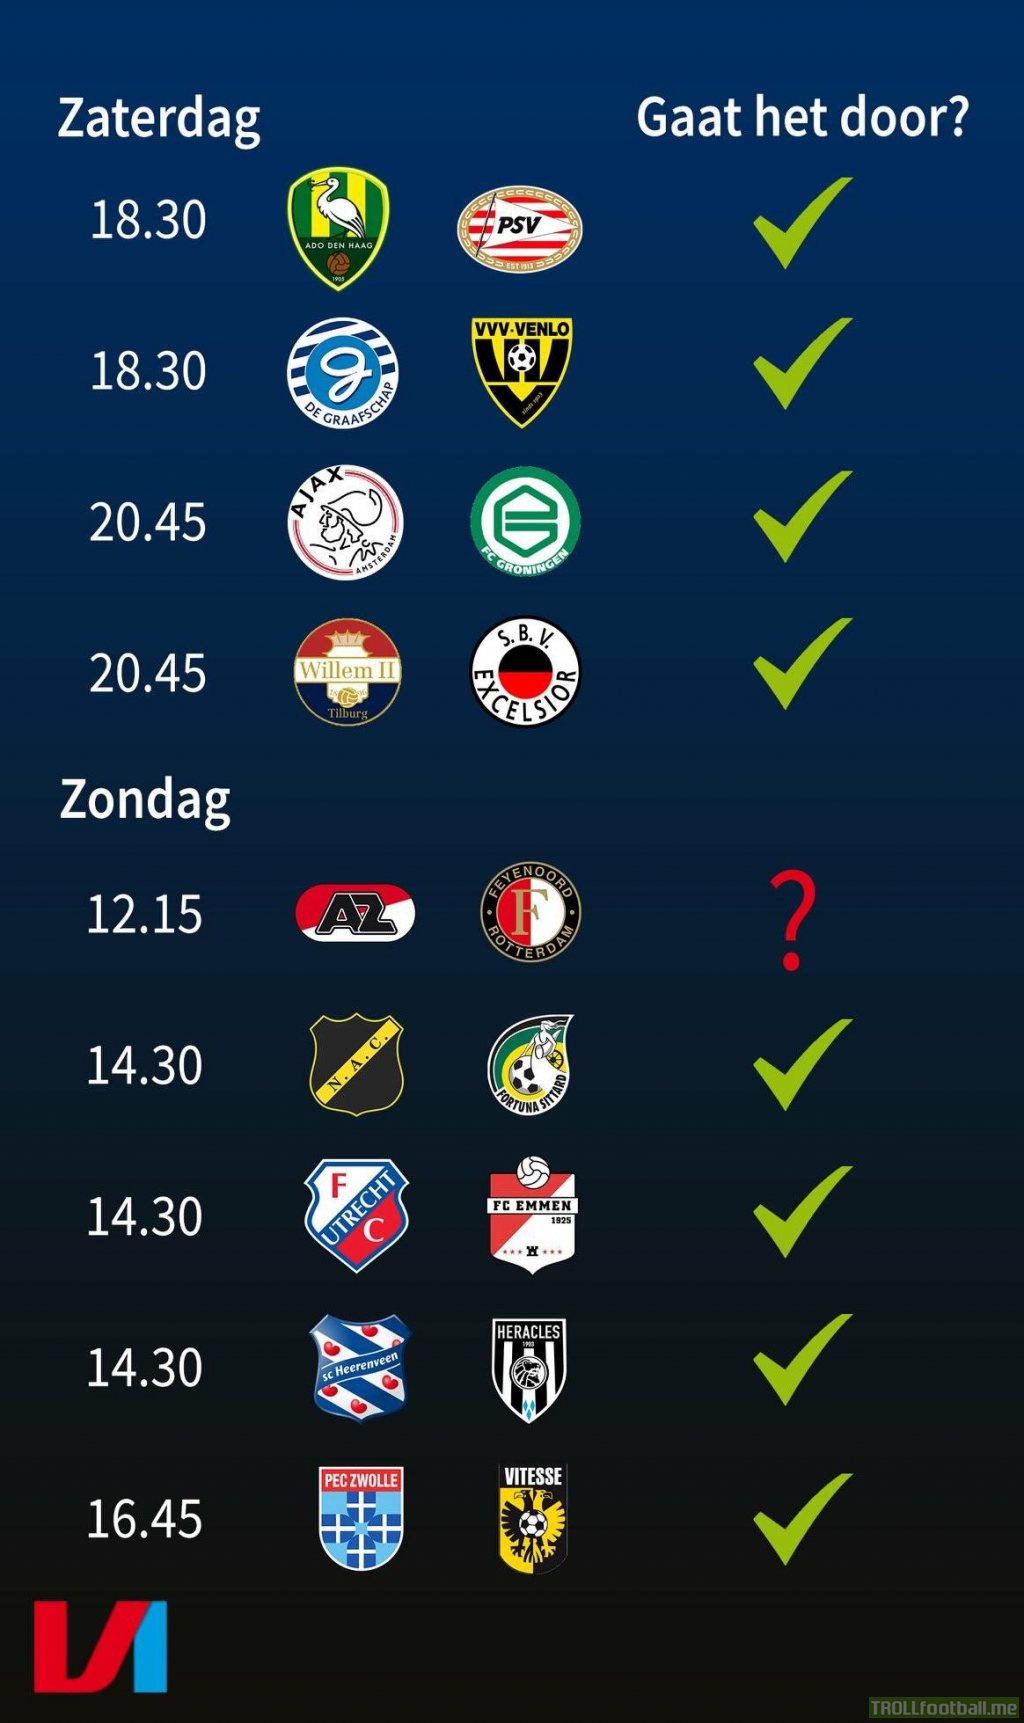 All but one game are confirmed to go on as planned in the Eredivisie, despite the police strike in the Netherlands. AZ - Feyenoord has not been decided on either way.